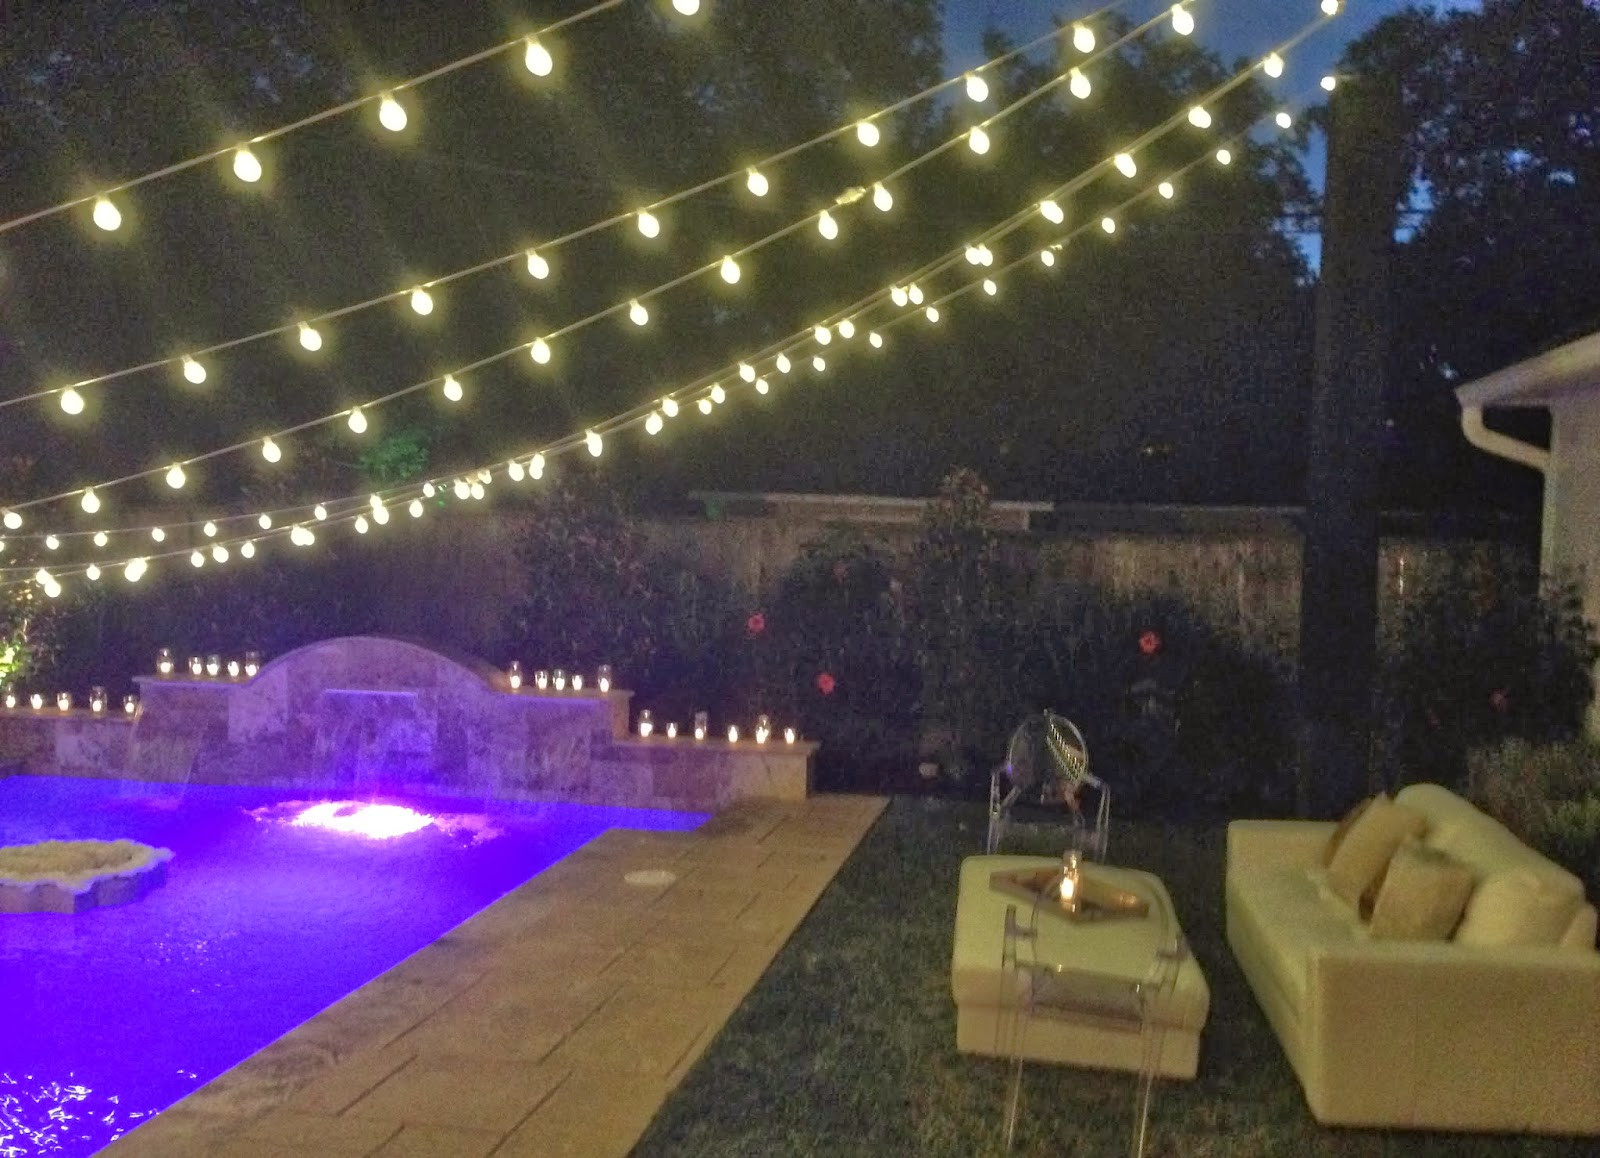 Sweet Sixteen Pool Party Ideas
 Perfectly Planned Blog Sydney s Sweet 16 Gold White